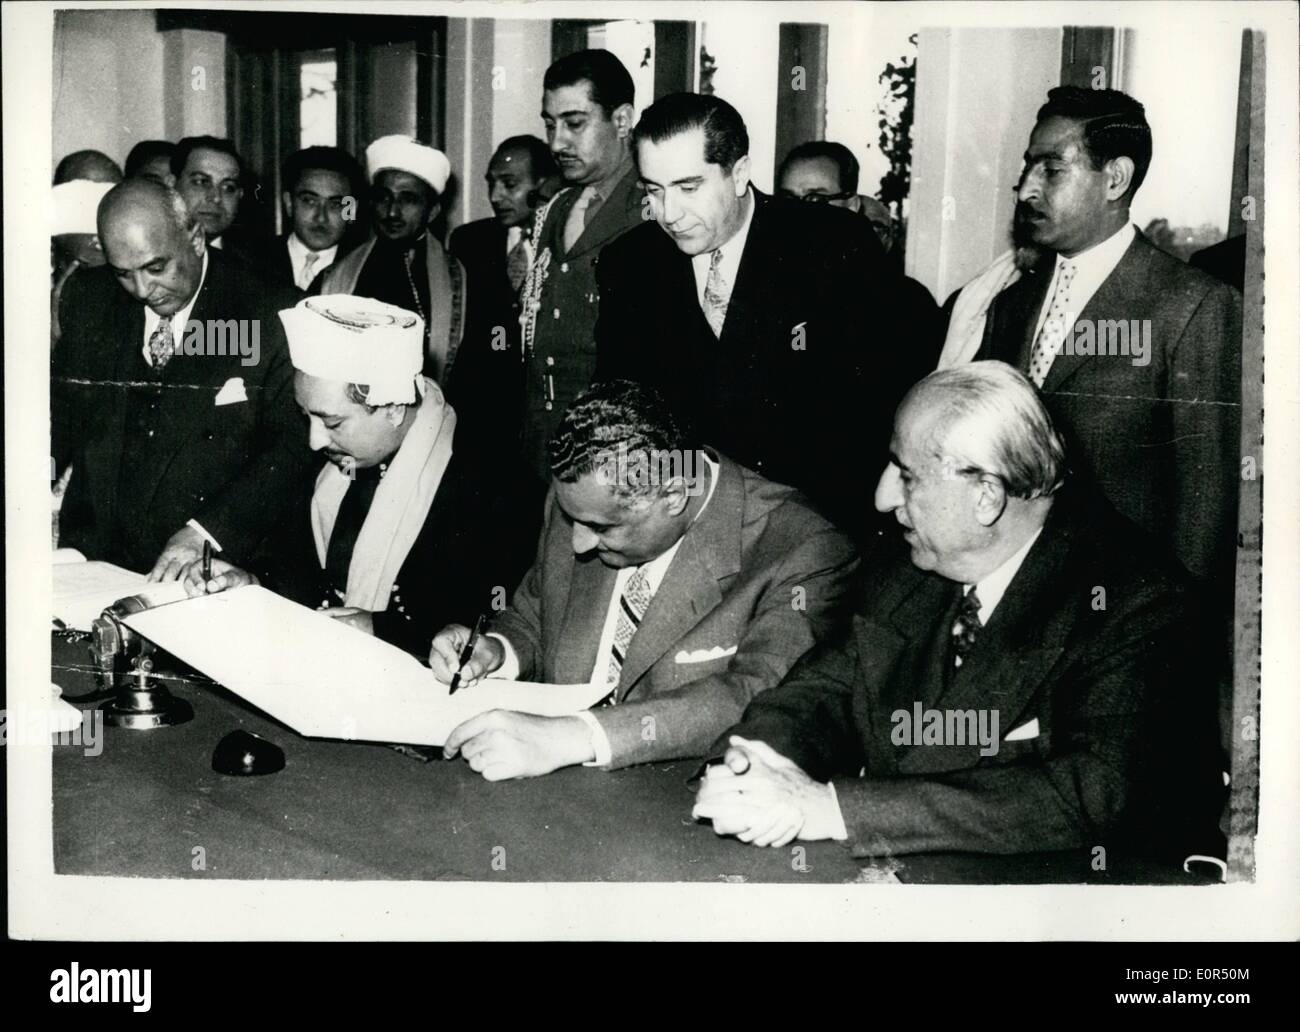 Mar. 03, 1958 - United Arab States Charter Signed In Damascus.U.A.R. And Yemen Will have supreme Council For Policy: The Charter for the creation of the United Arab States was signed at the Guest Palace in Damascus recently between the United Arab Republic and the Kingdom of Yemen. President Gamal Abdul Nasser signed on the behalf of the U.A.R. while Emir Mohammed El Badr, Crown Prince of the Yemen, signed for the South Arabian Kingdom. Photo Shows President Nasser (center) and Prince Seif Islam el Badr (on left) signing the Charter at the Guest Palace in Damascus. Stock Photo